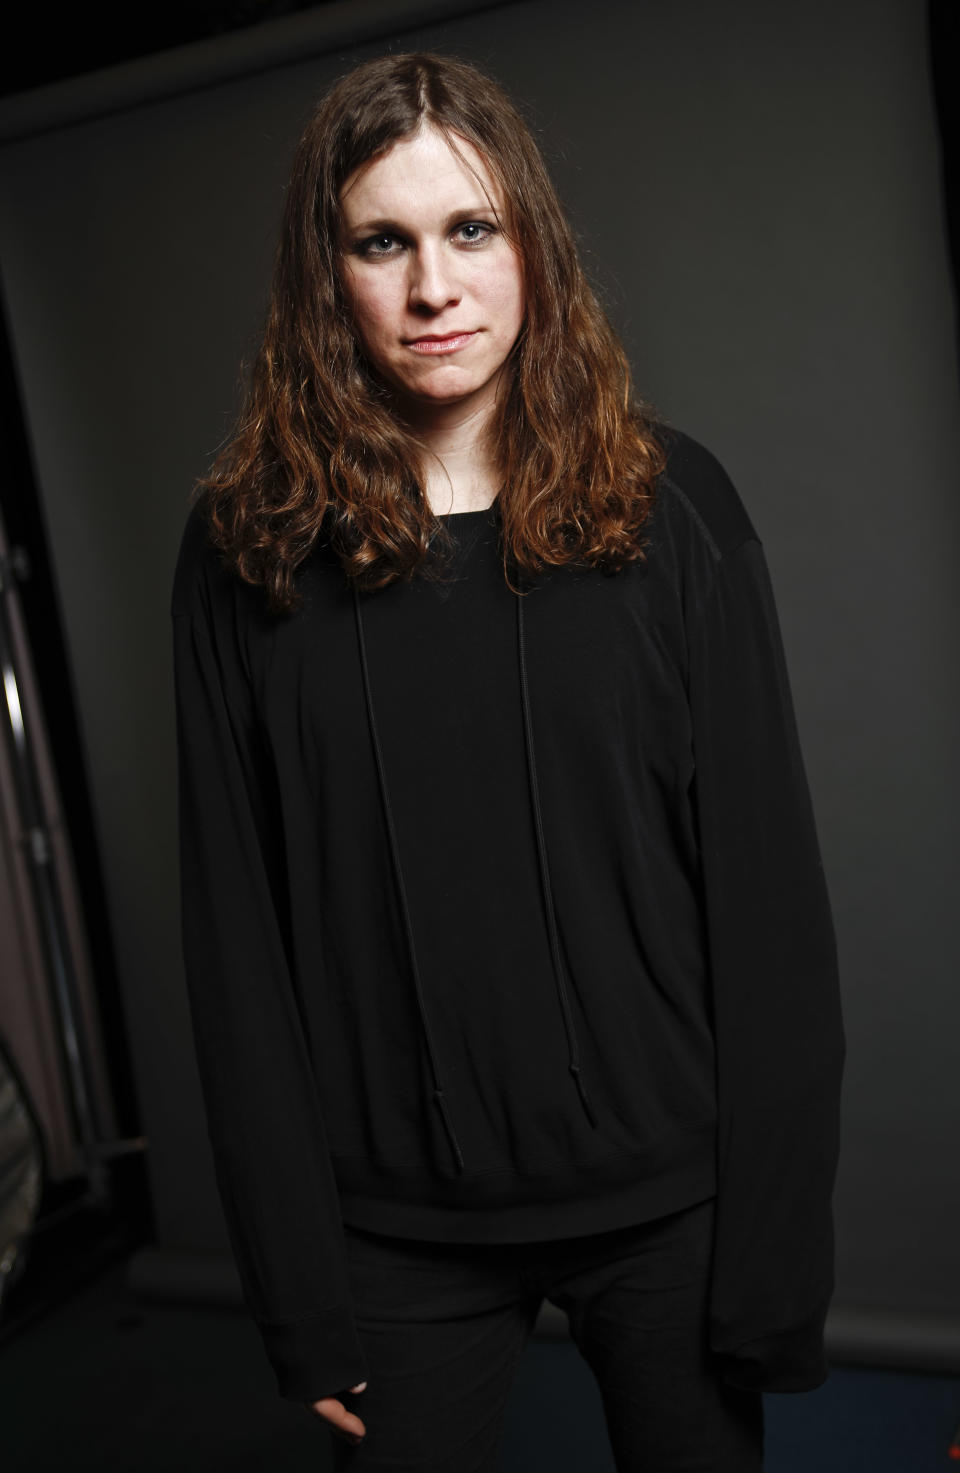 This Jan. 10, 2014 photo shows Laura Jane Grace, formerly known as Tom Gabel, of the band Against Me!, in New York. Grace, 33, publicly came out as transgender in 2012. She was born Tom Gabel and performed with the Florida-based band since 1997. The group’s latest album, “Transgender Dysphoria Blues,” a concept record about a transgender prostitute, marked a chart high for the band when it reached No. 23 on the Billboard 200 albums chart in late January. (Photo by Brian Ach/Invision/AP)